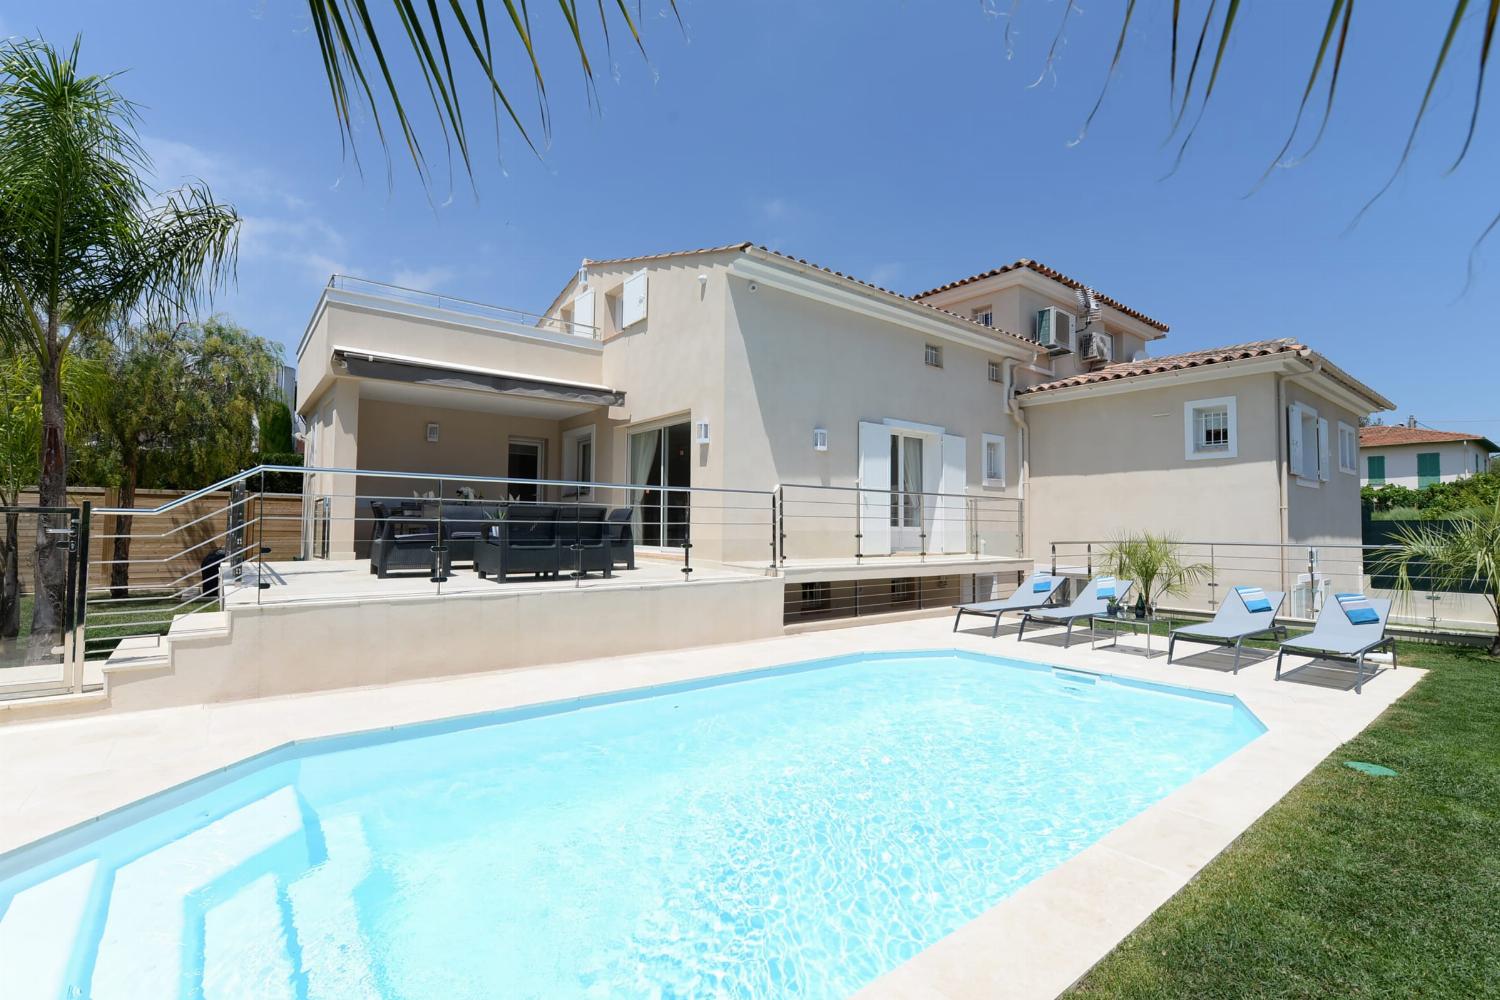 Provence holiday villa with private heated pool